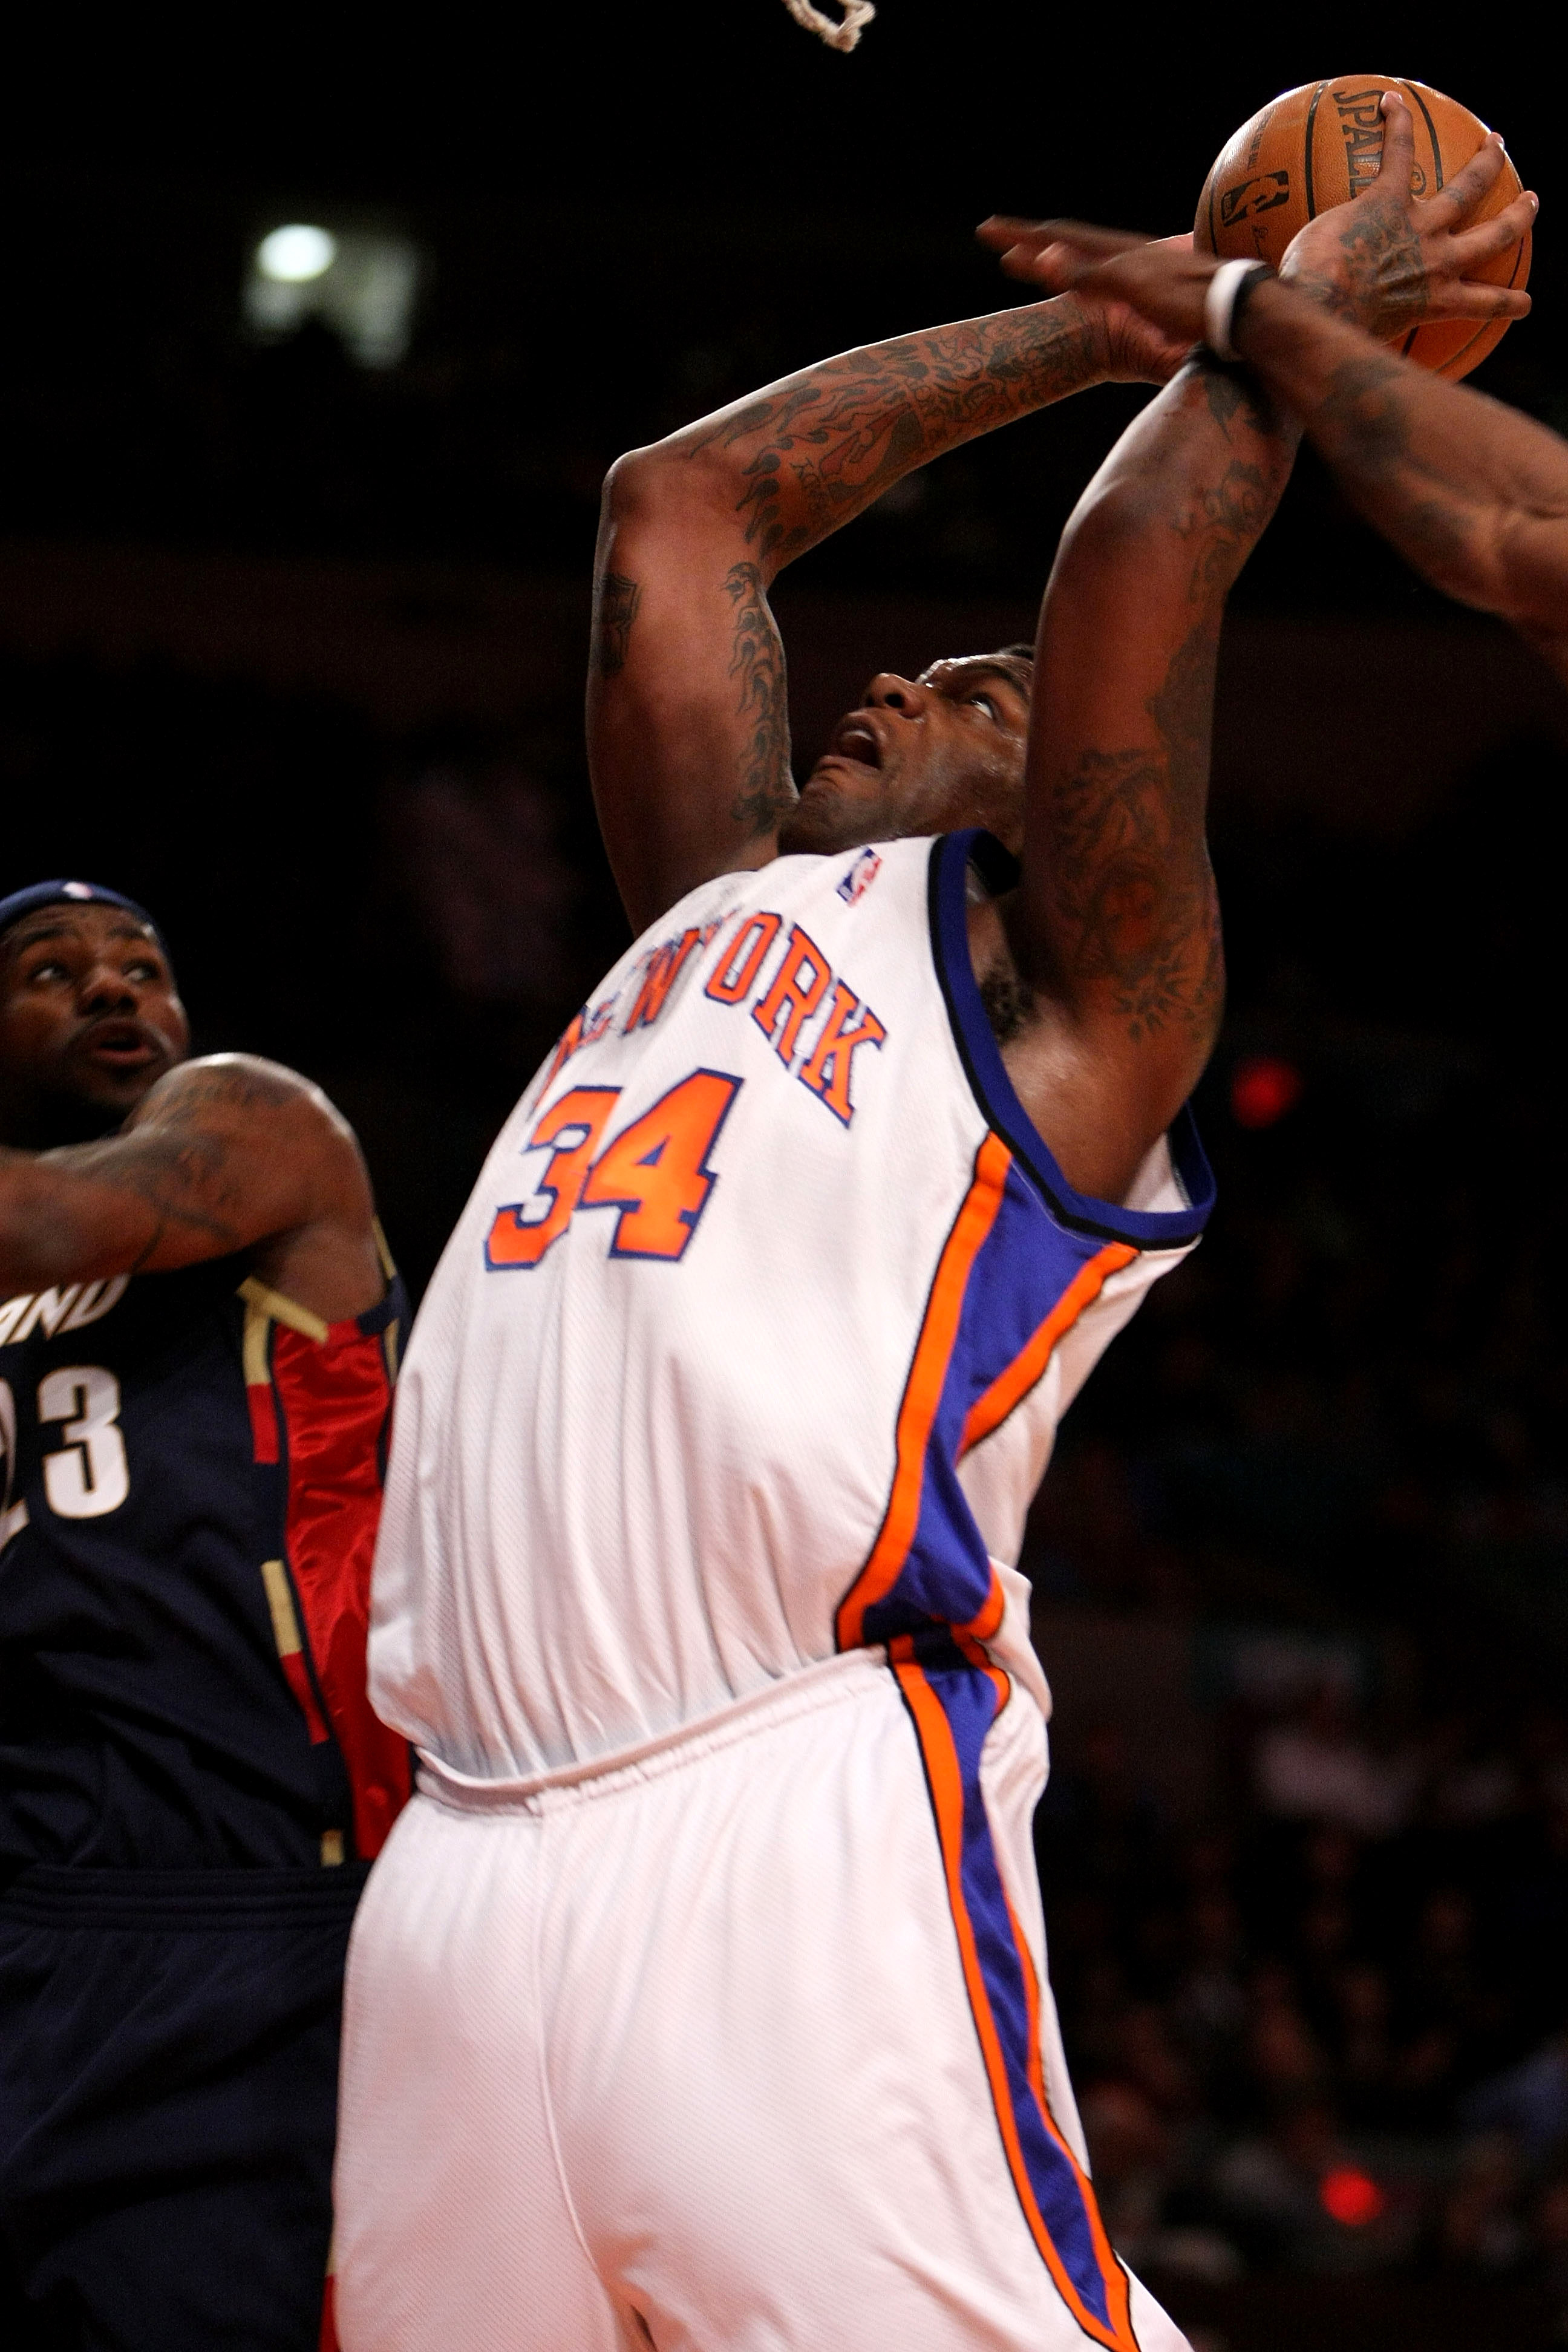 NEW YORK - MARCH 05:  Eddy Curry #34 of the New York Knicks looks to score against the Cleveland Cavaliers during their game on March 5, 2008 at Madison Square Garden in New York City.   NOTE TO USER: User expressly acknowledges and agrees that, by downlo